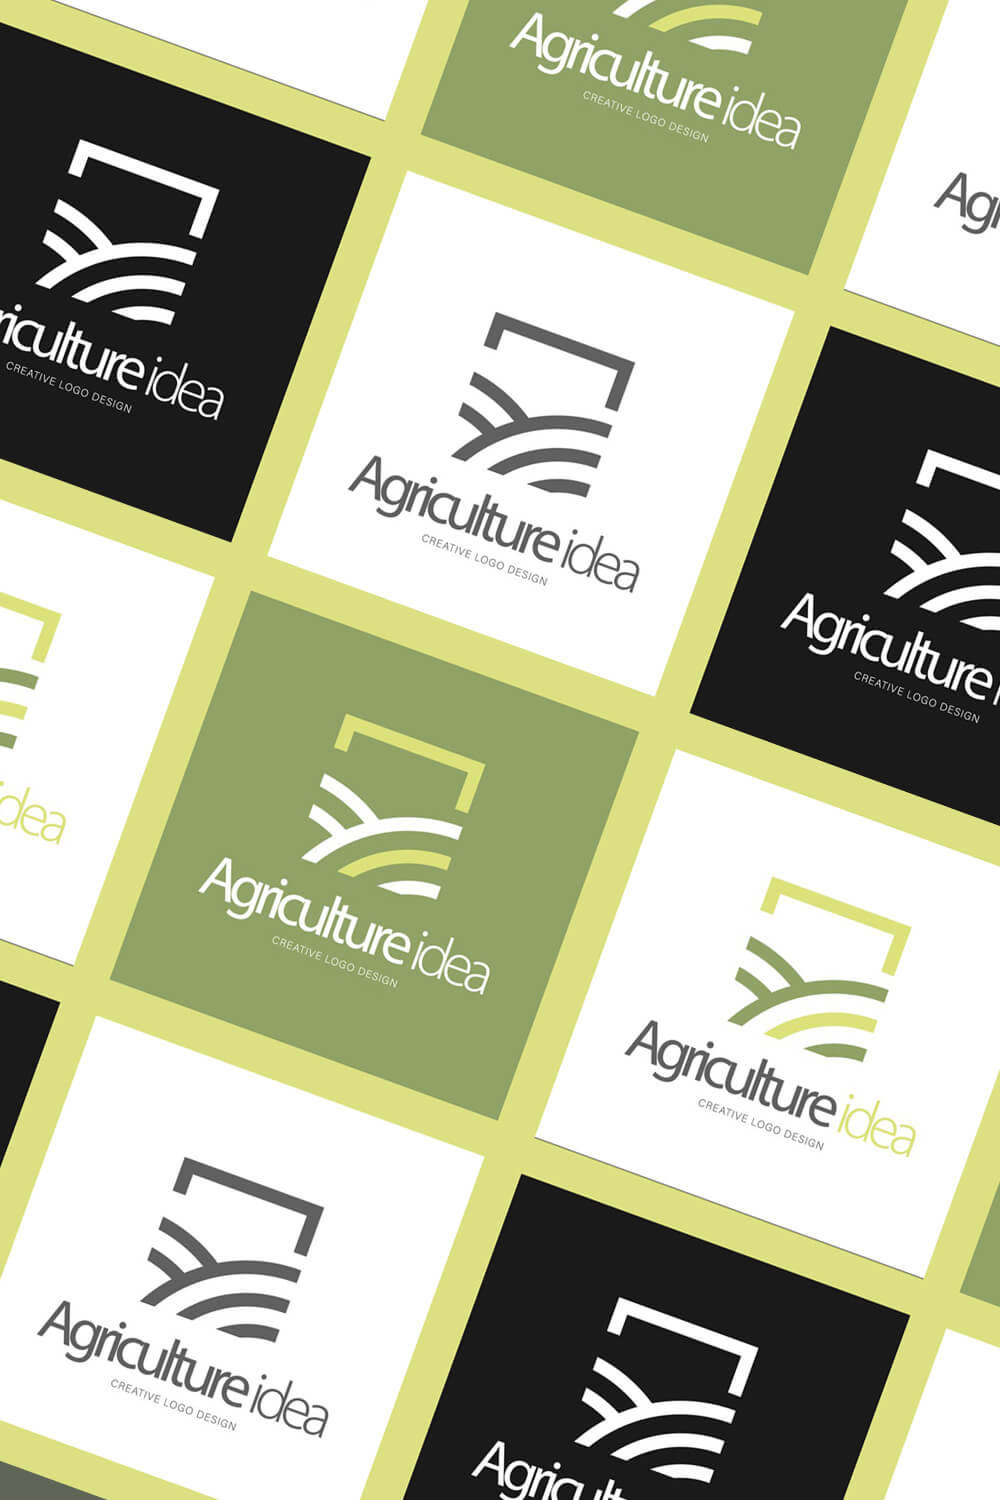 Diagonal images of logos of agriculture idea on white, green, black backgrounds.